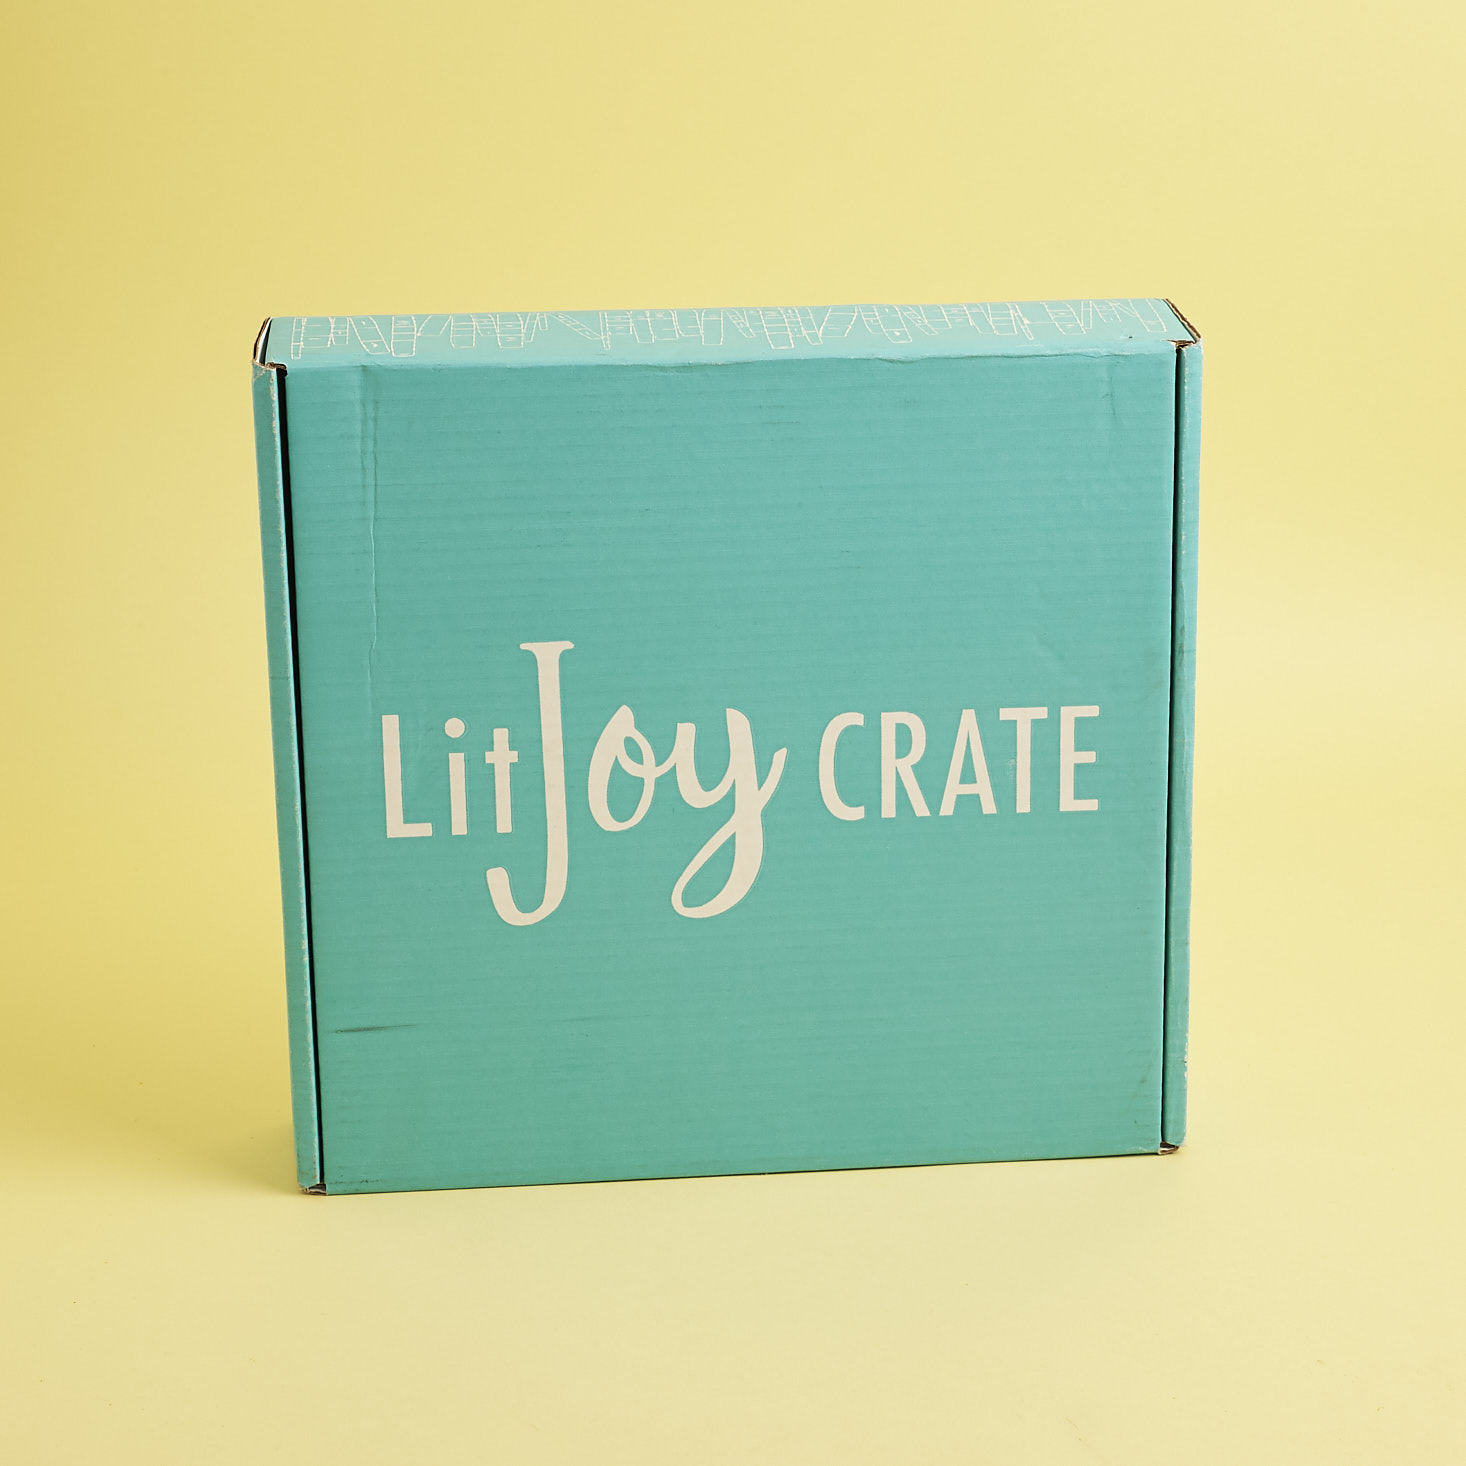 LitJoy Crate Picture Book Box Review + Coupon – December 2017